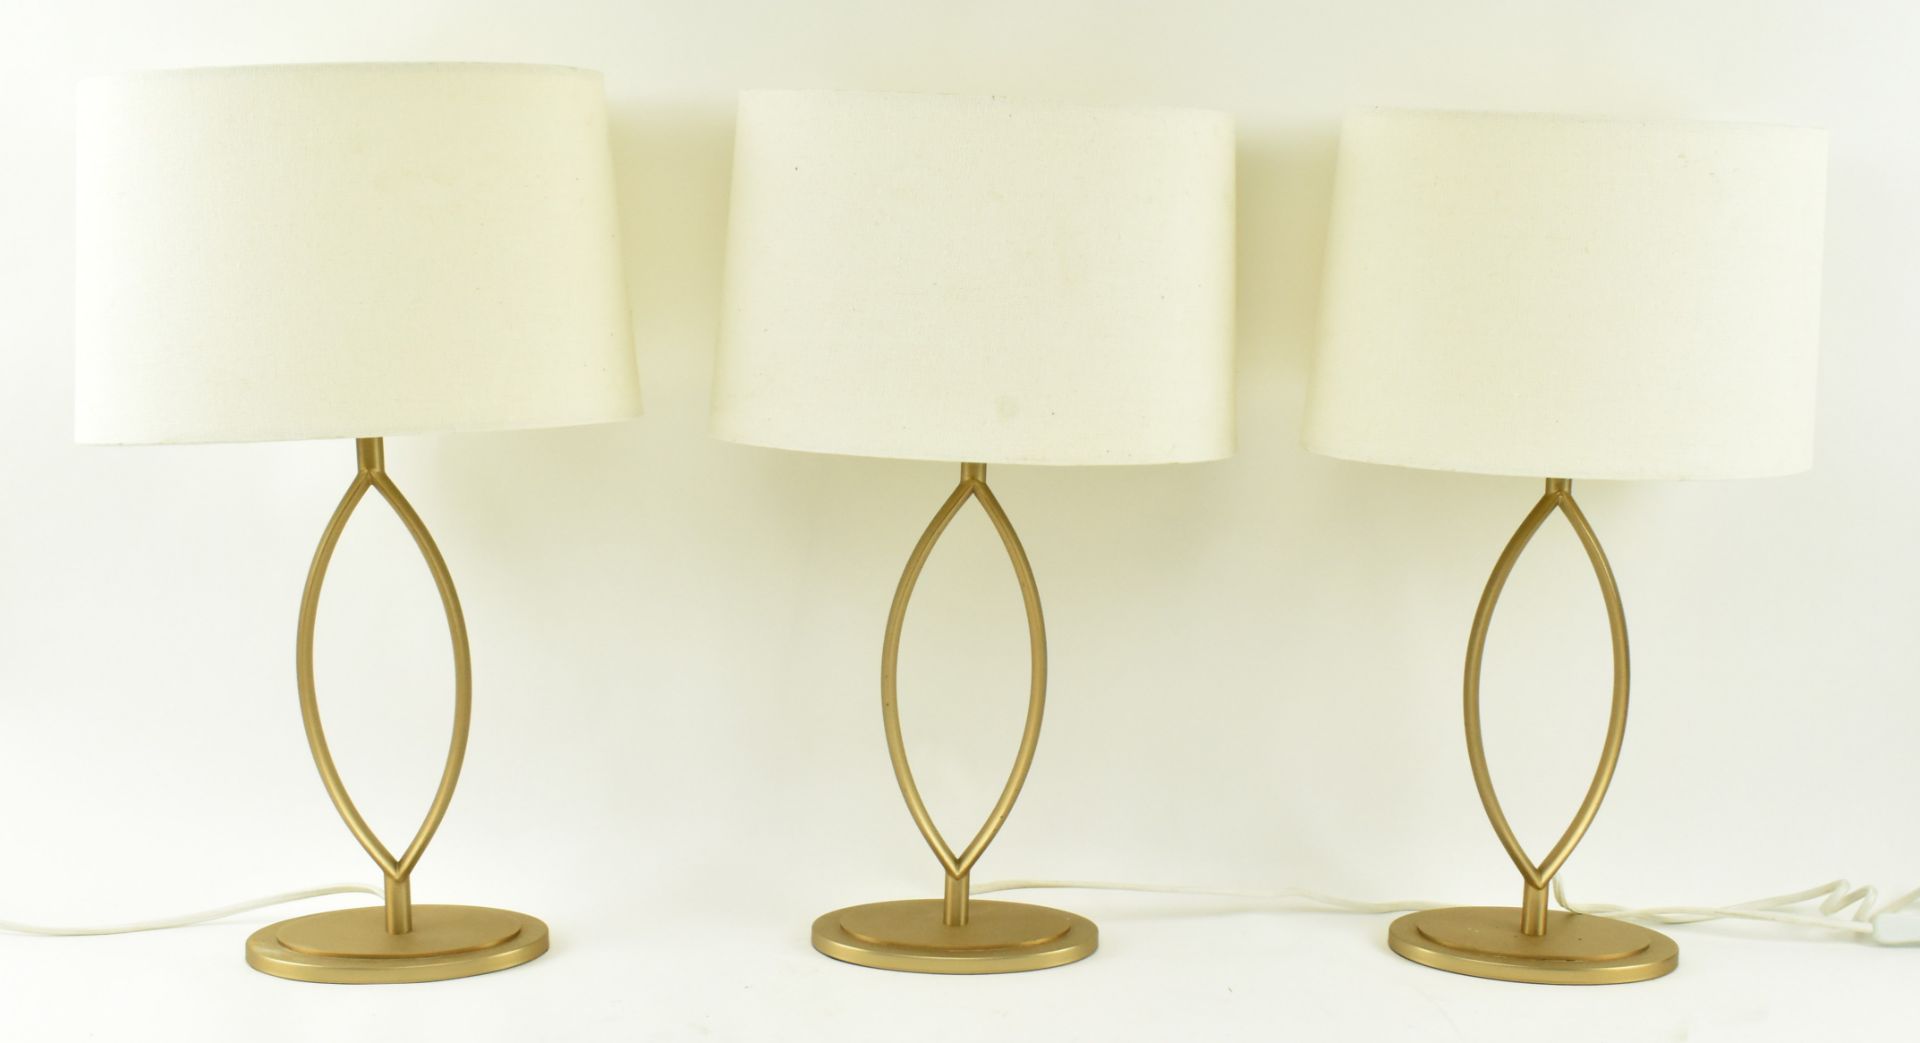 THREE HIGH END DESIGN CHROME GOLD METAL ABSTRACT DESK LAMPS